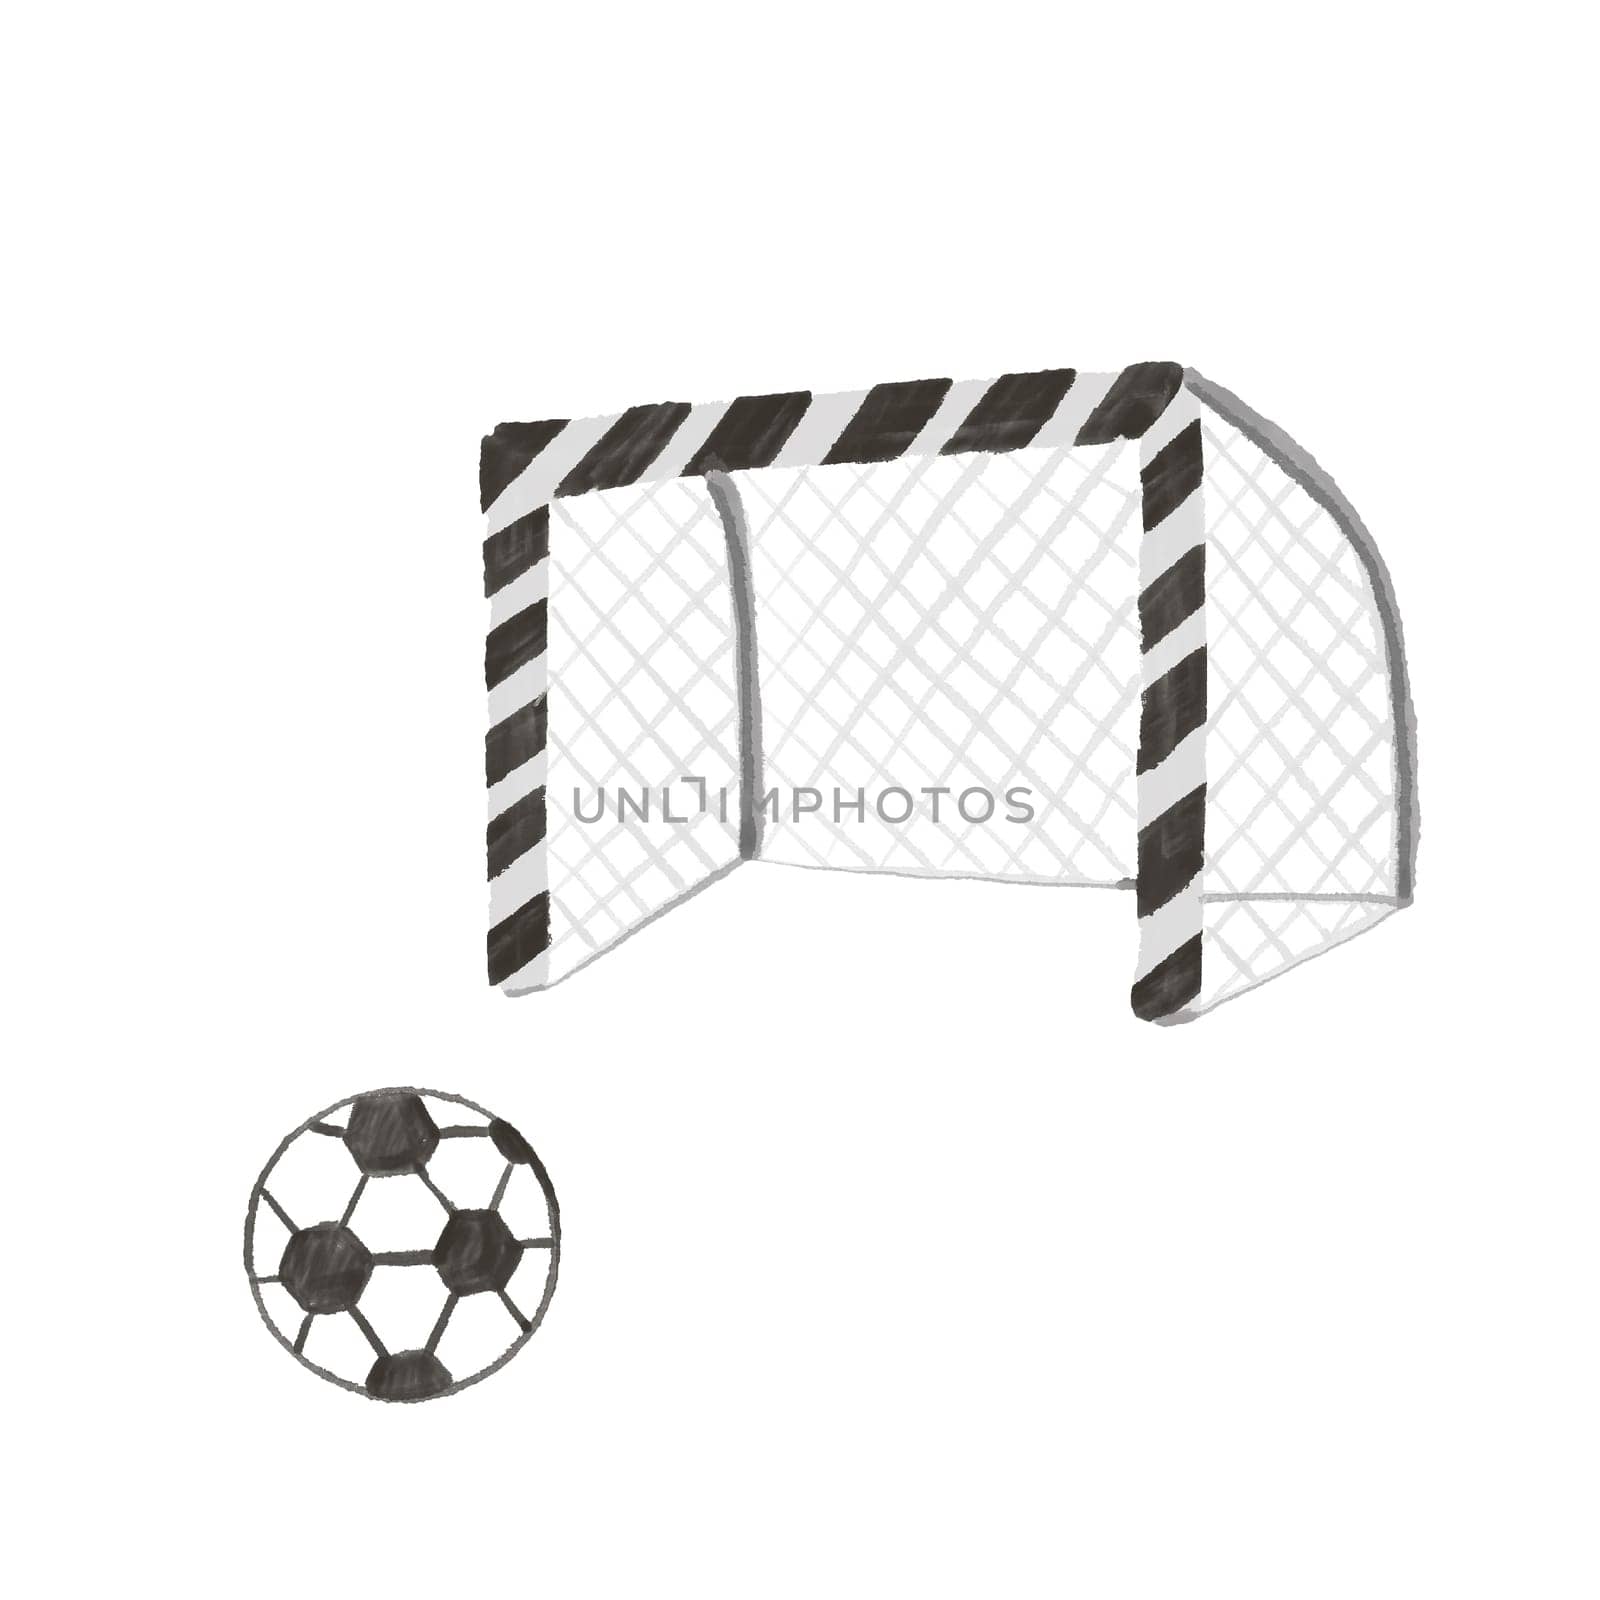 Soccer goal and ball. Football Graphic illustration isolated on white background